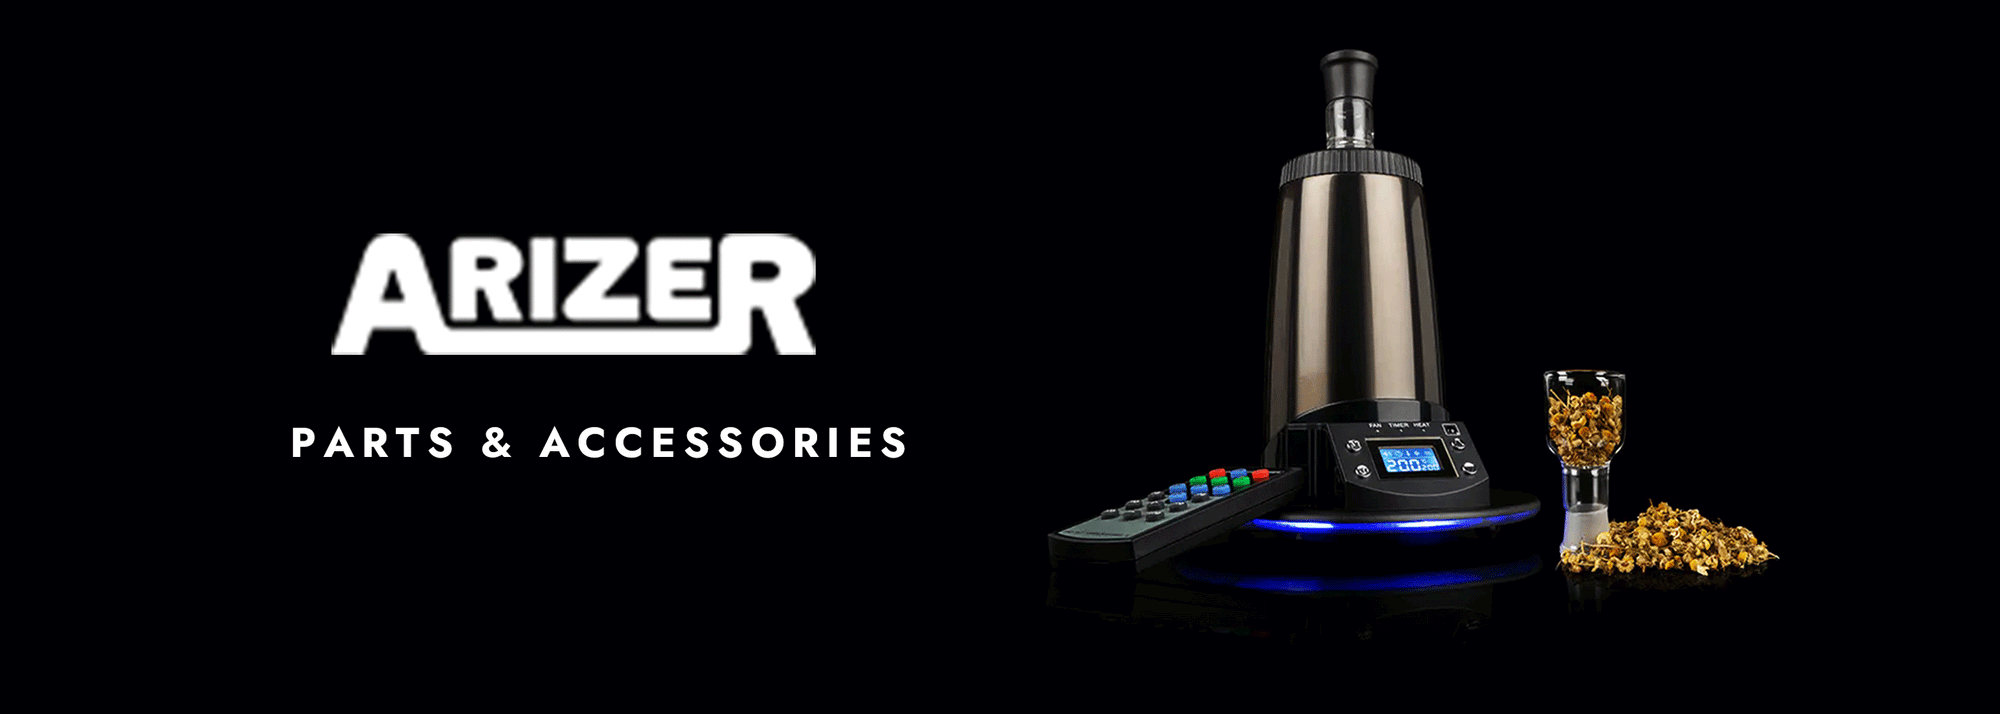 Buy Arizer Dry Herb Vaporizers - Wick and Wire Co Melbourne Vape Shop, Victoria Australia